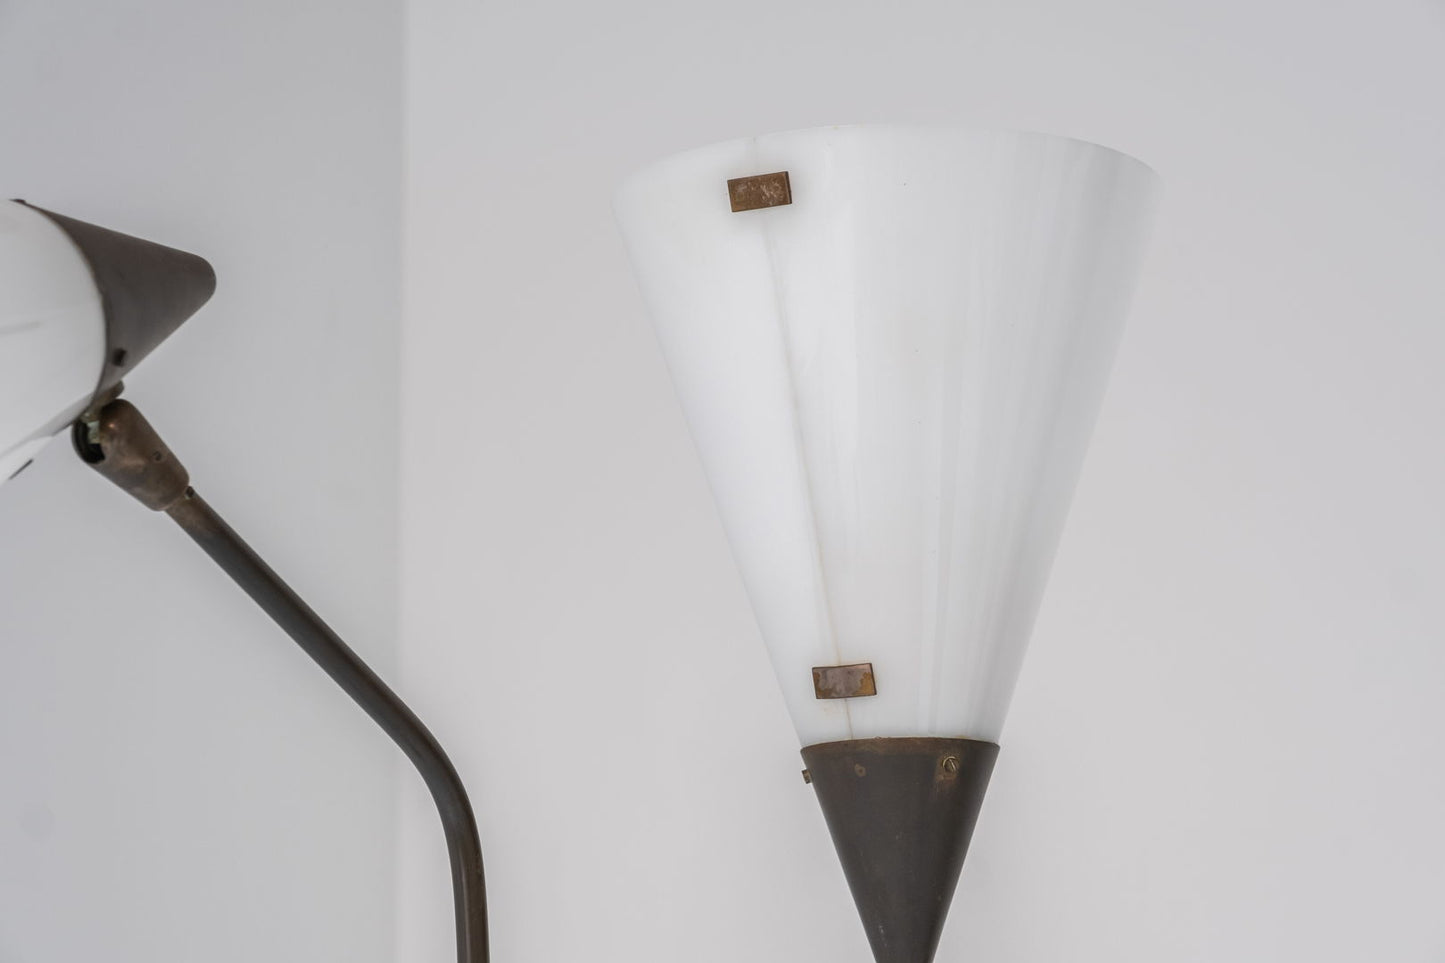 Rare 339-2 PX two armed floor lamp by Angelo and Giuseppe Ostuni & Renato Forti for Oluce, Italy 1952.